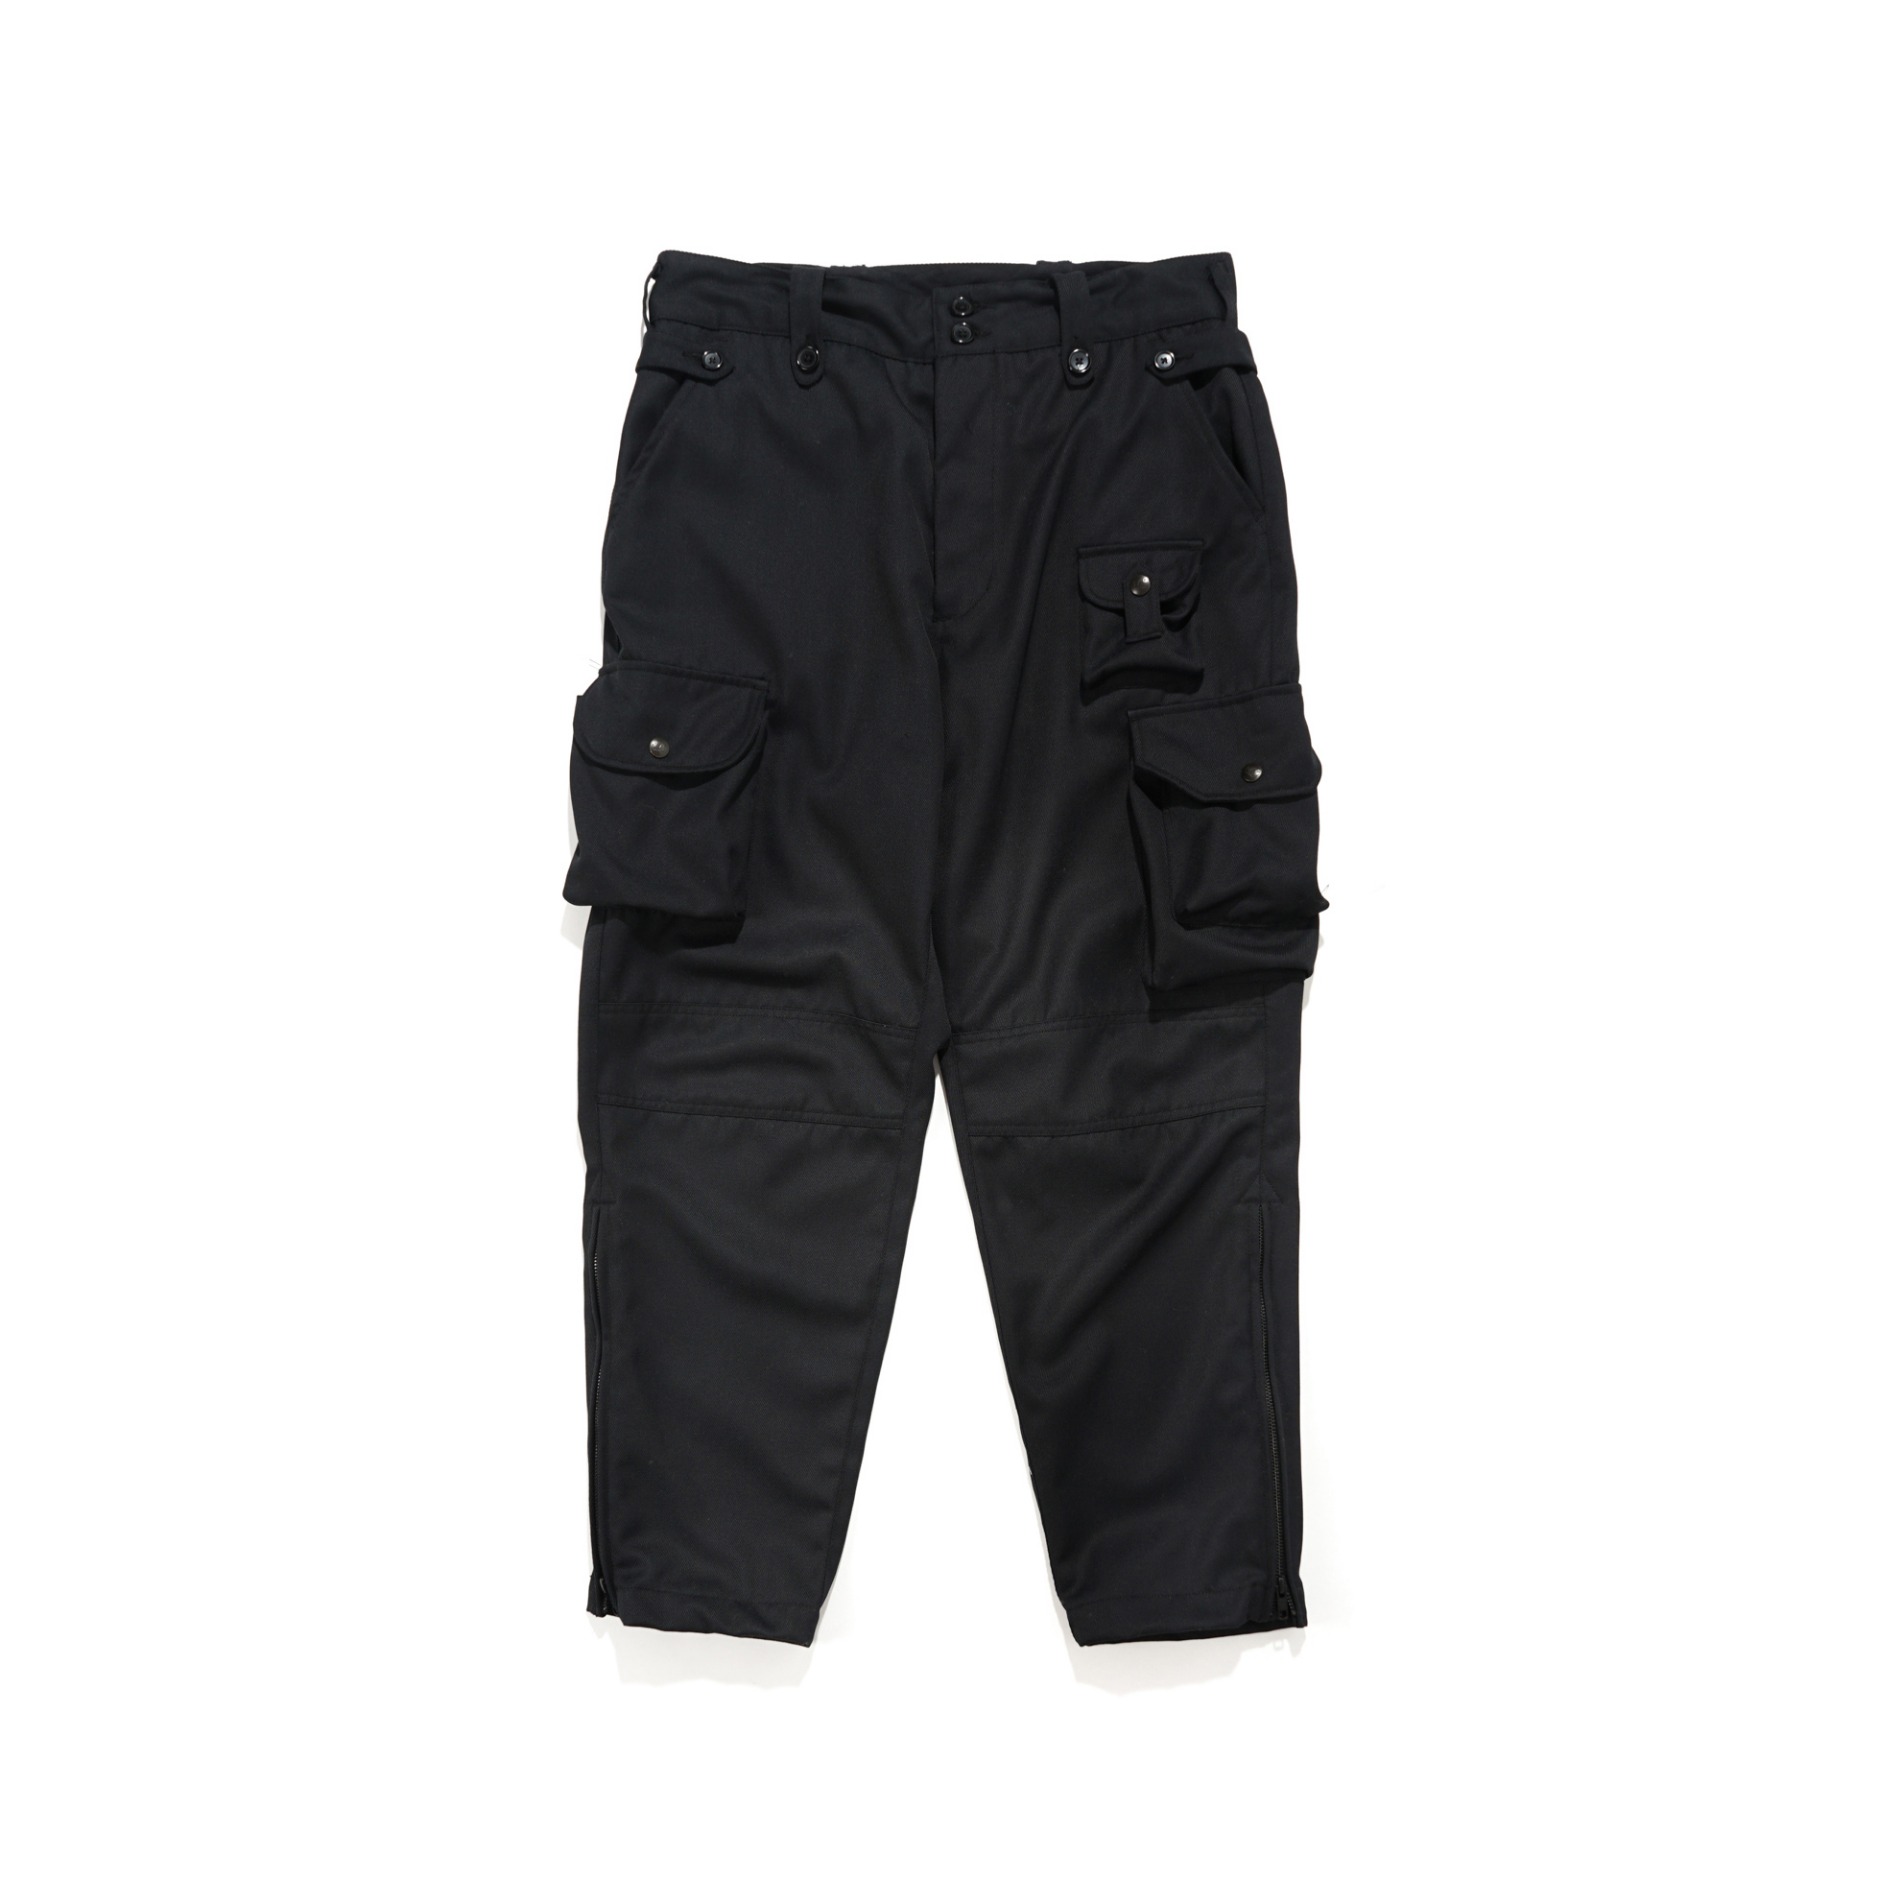 AW21 AIE / FRB PANTS BLACK WOOL POLY SERGE